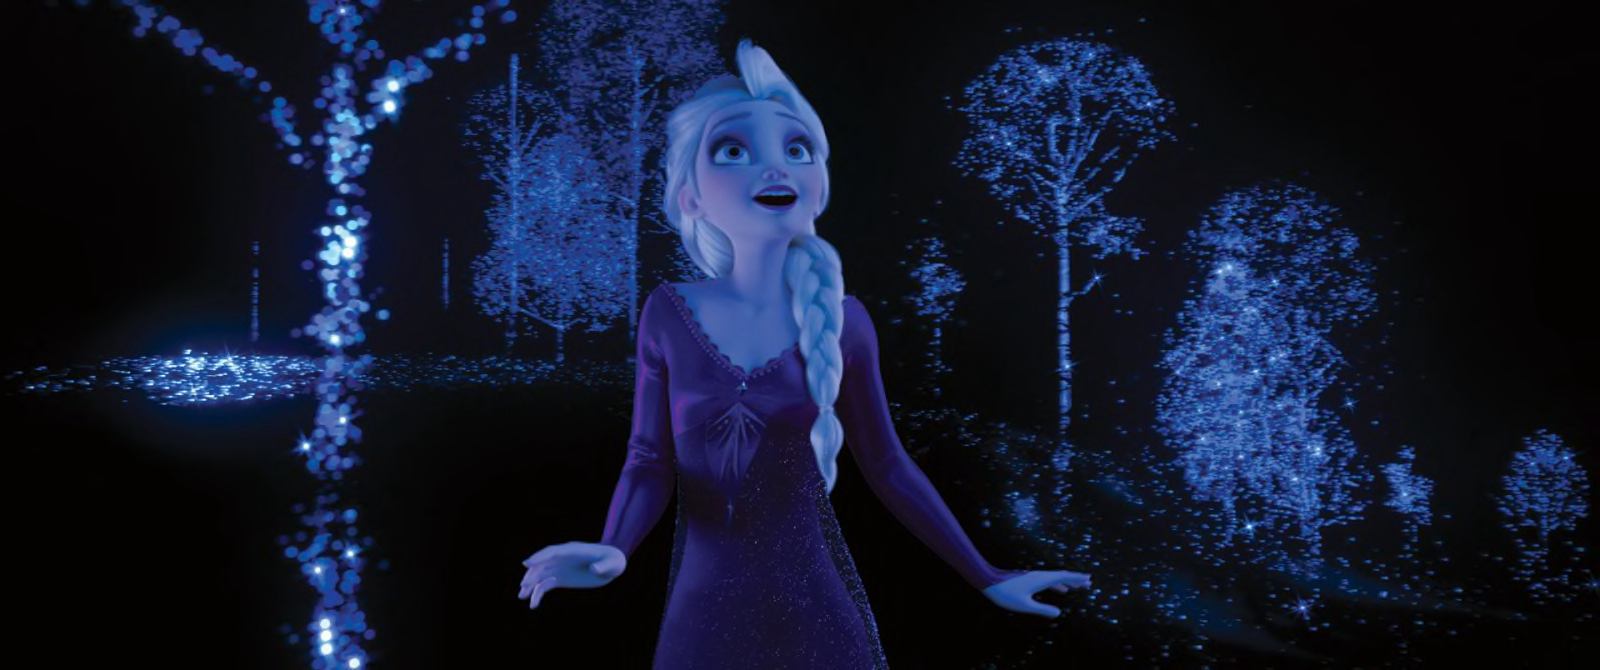 Schuine streep Dag geloof When will Frozen II come to Amazon Video, DVD, and Blu-ray?